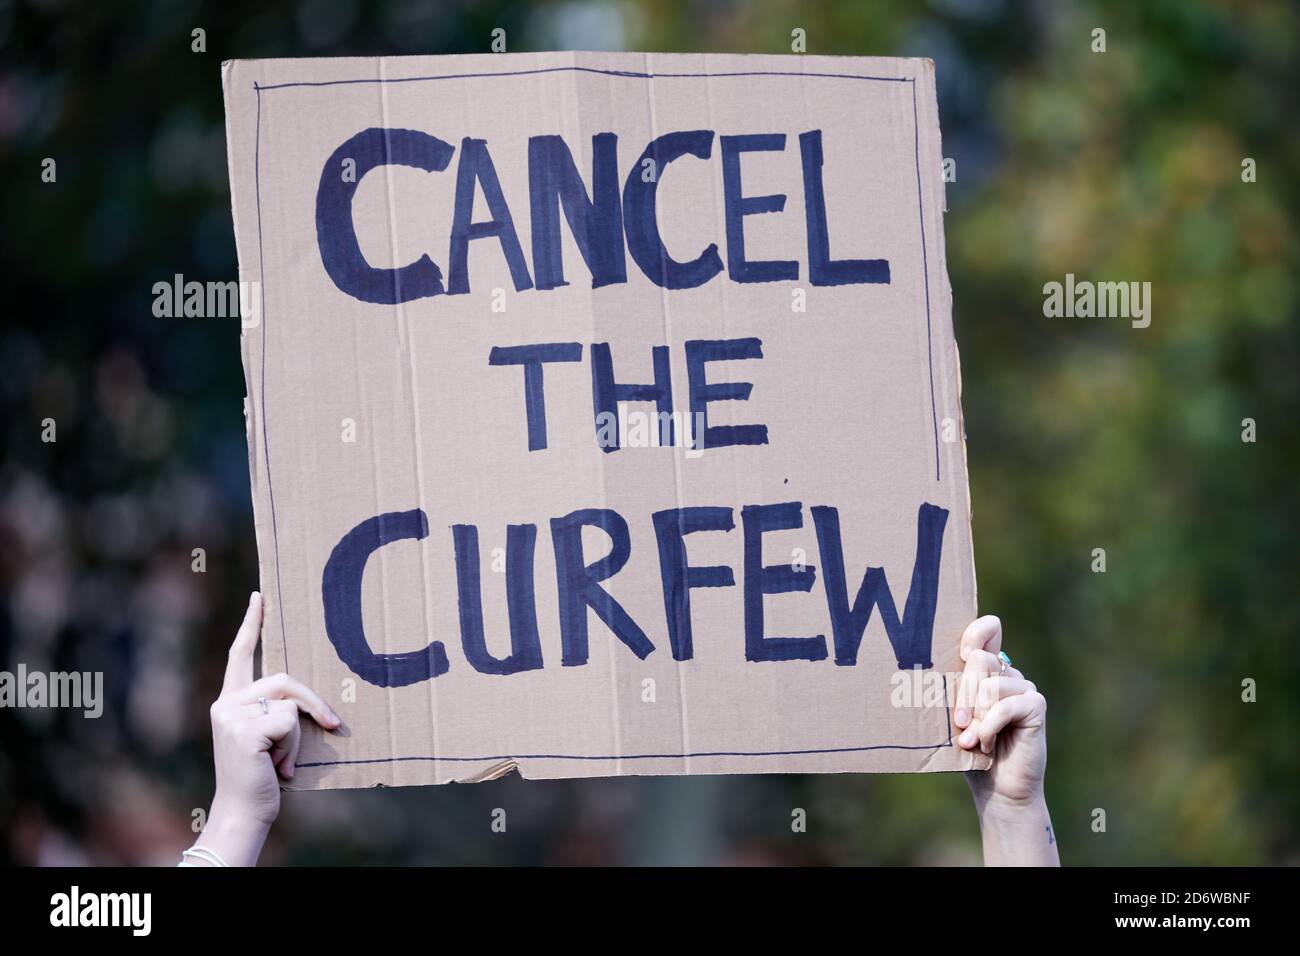 London, UK. - 19 Oct 2020: A sign calling to Cancel the Curfew is held up by hospitality workers during a  protest in Parliament Square against the UK’s coronavirus restrictions. Stock Photo